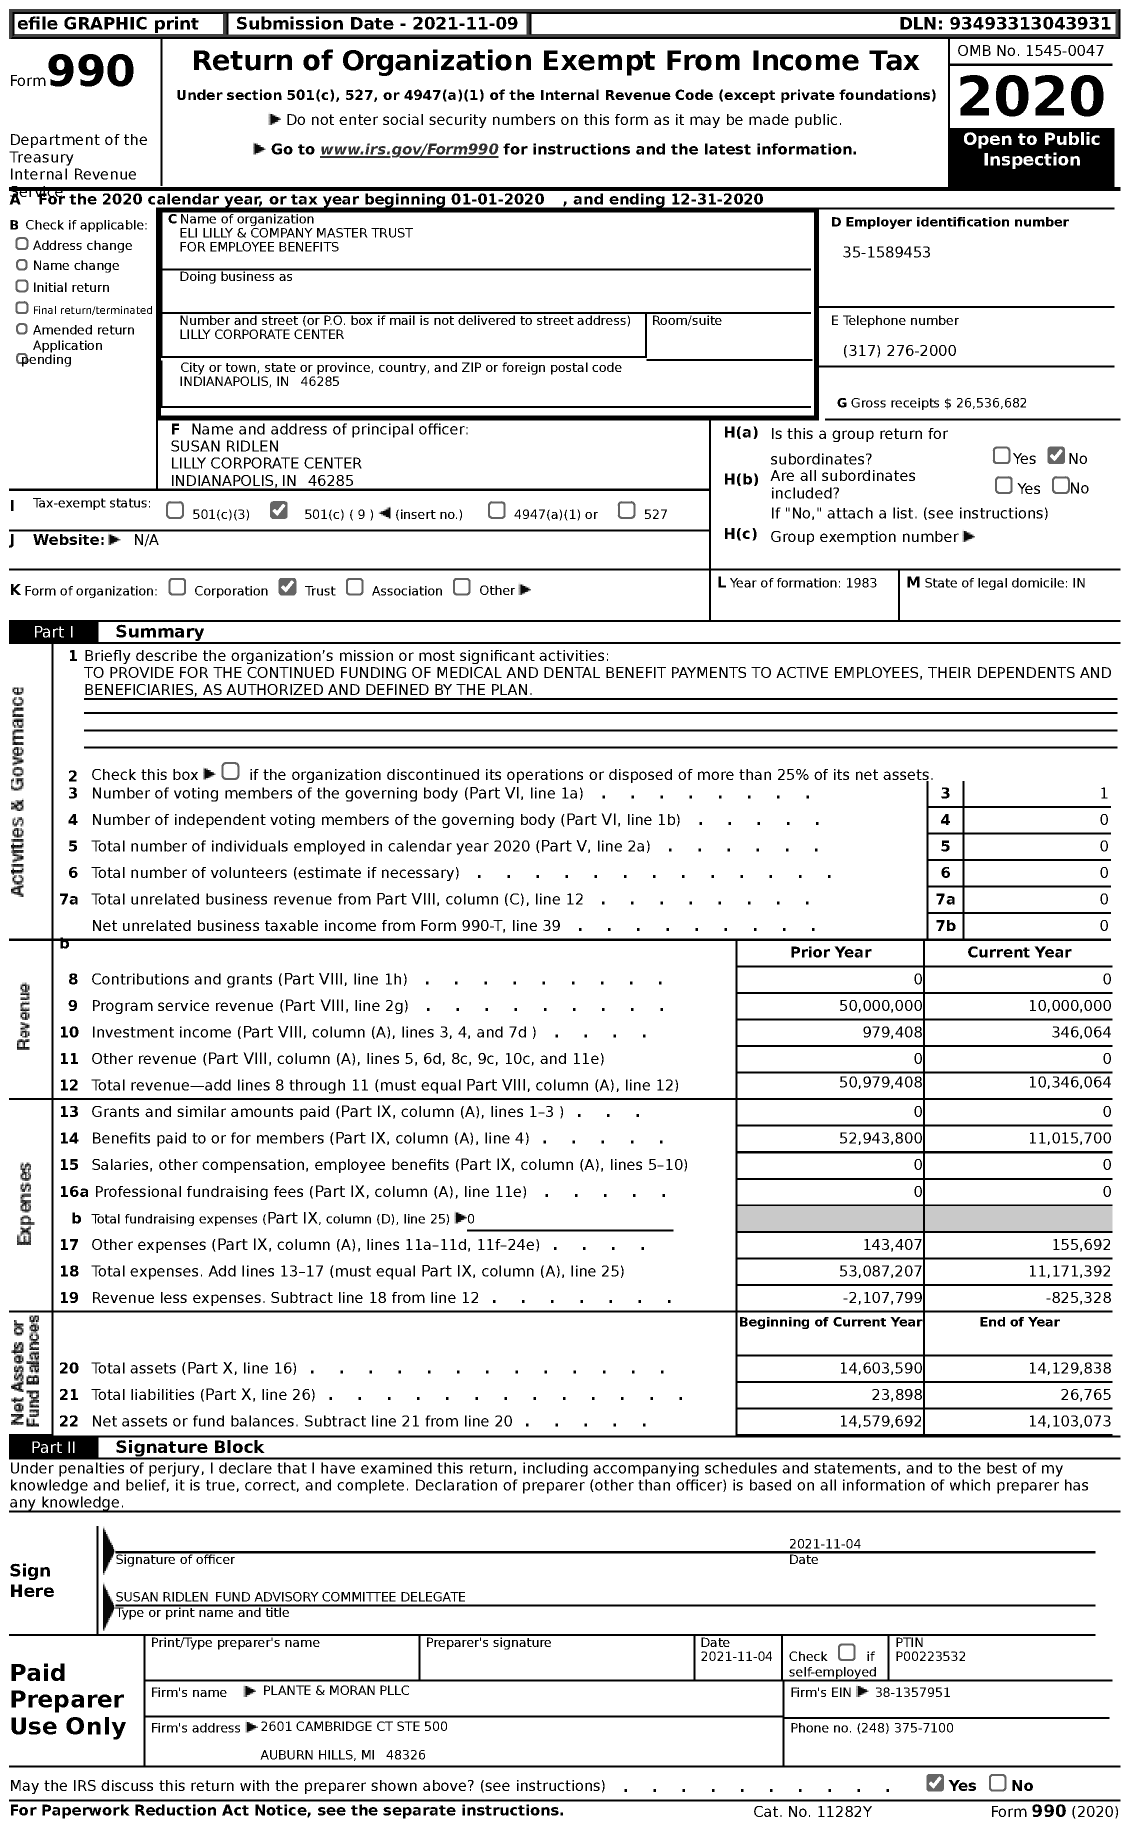 Image of first page of 2020 Form 990 for Eli Lilly and Company Master Trust for Employee Benefits